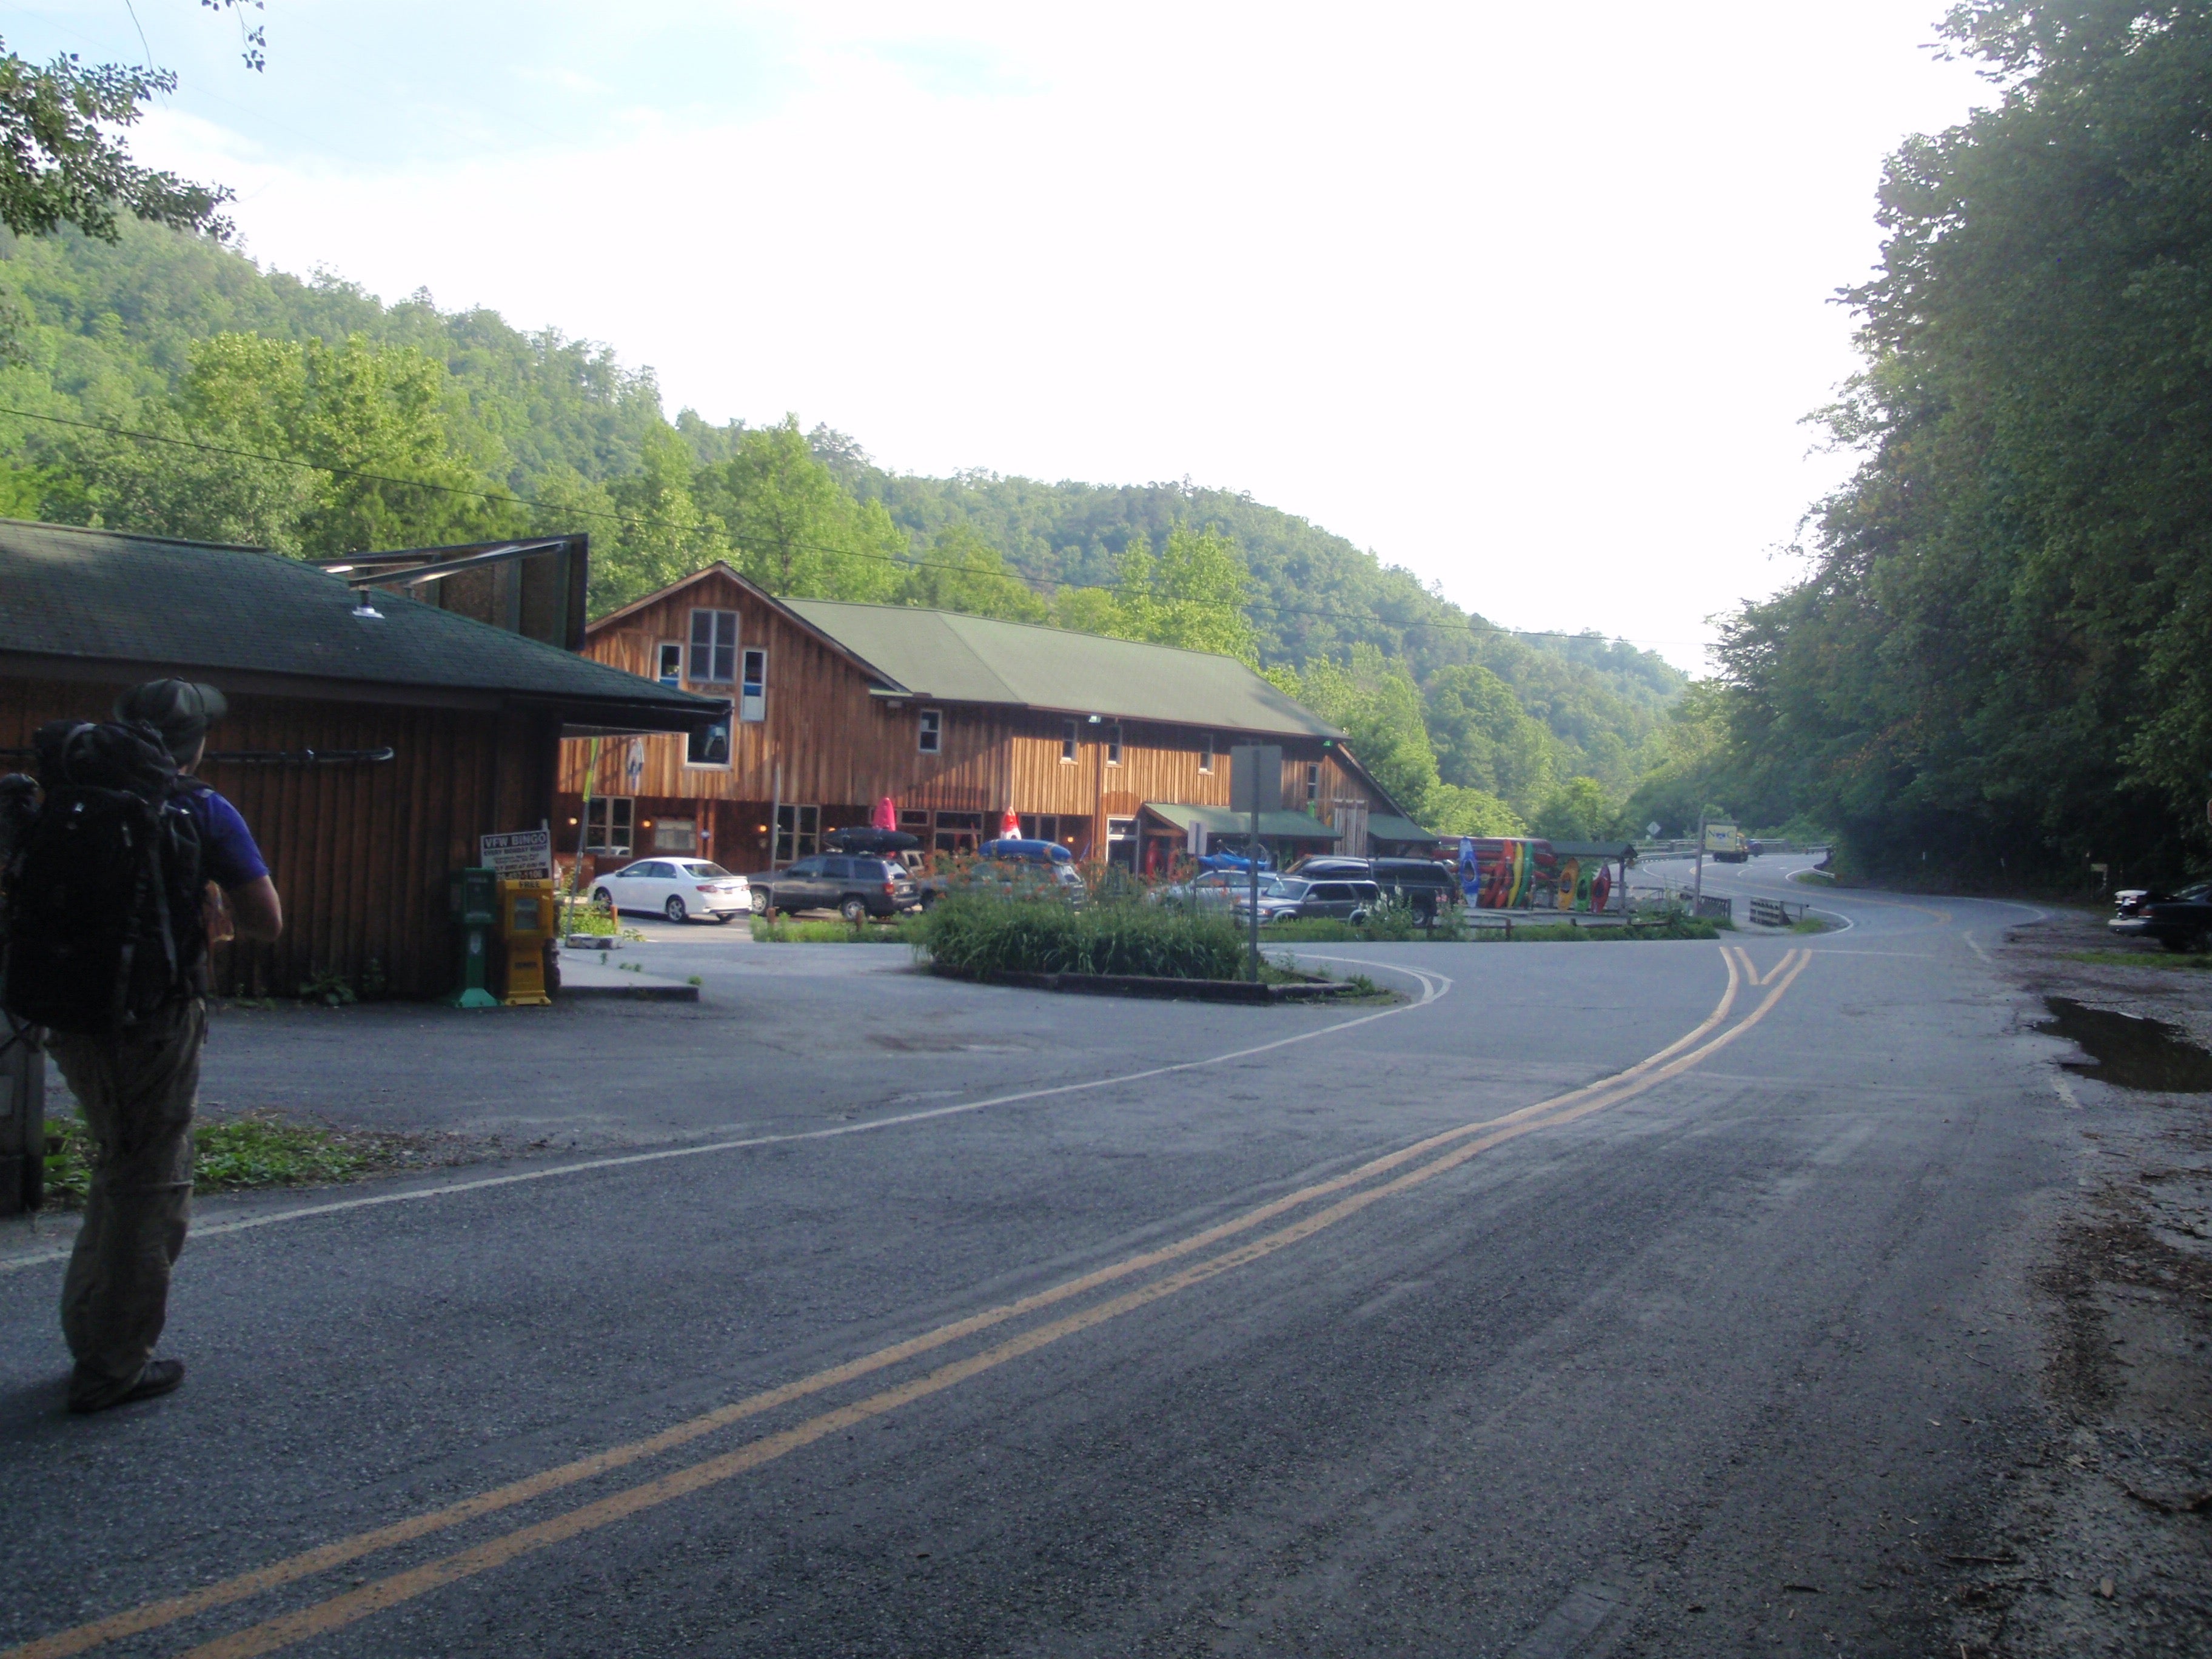 The nearby Nantahala Outdoor Center offers river fun and hiking opportunities